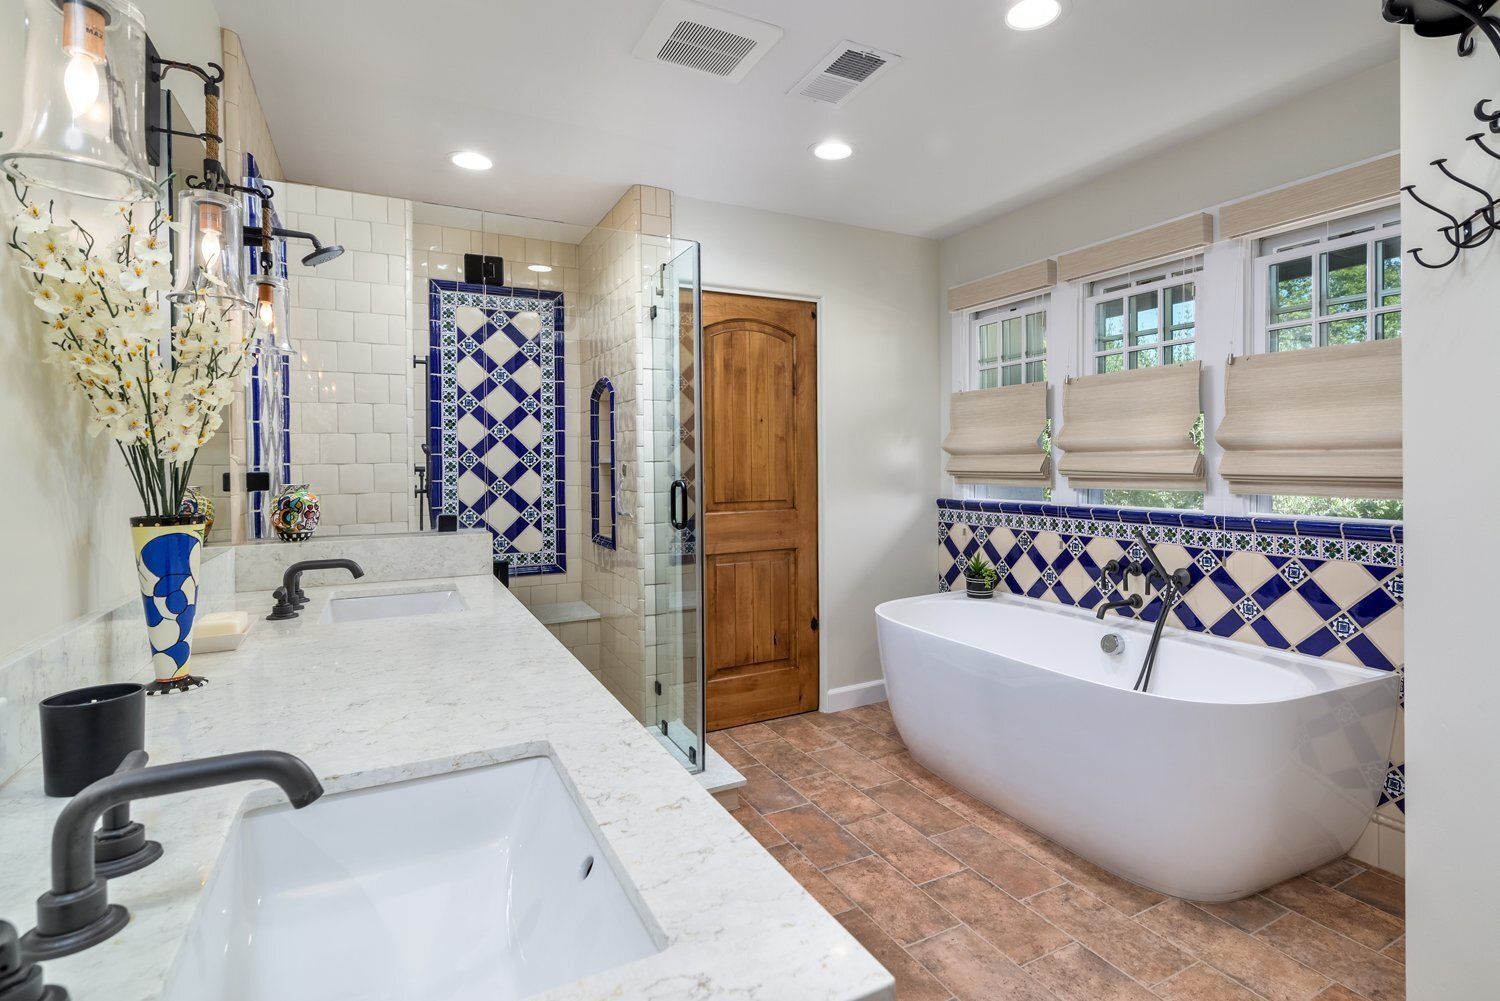 Westside Remodeling strives to provide outstanding service and guidance to homeowners in Moorpark, CA, who want a beautiful home transformation.